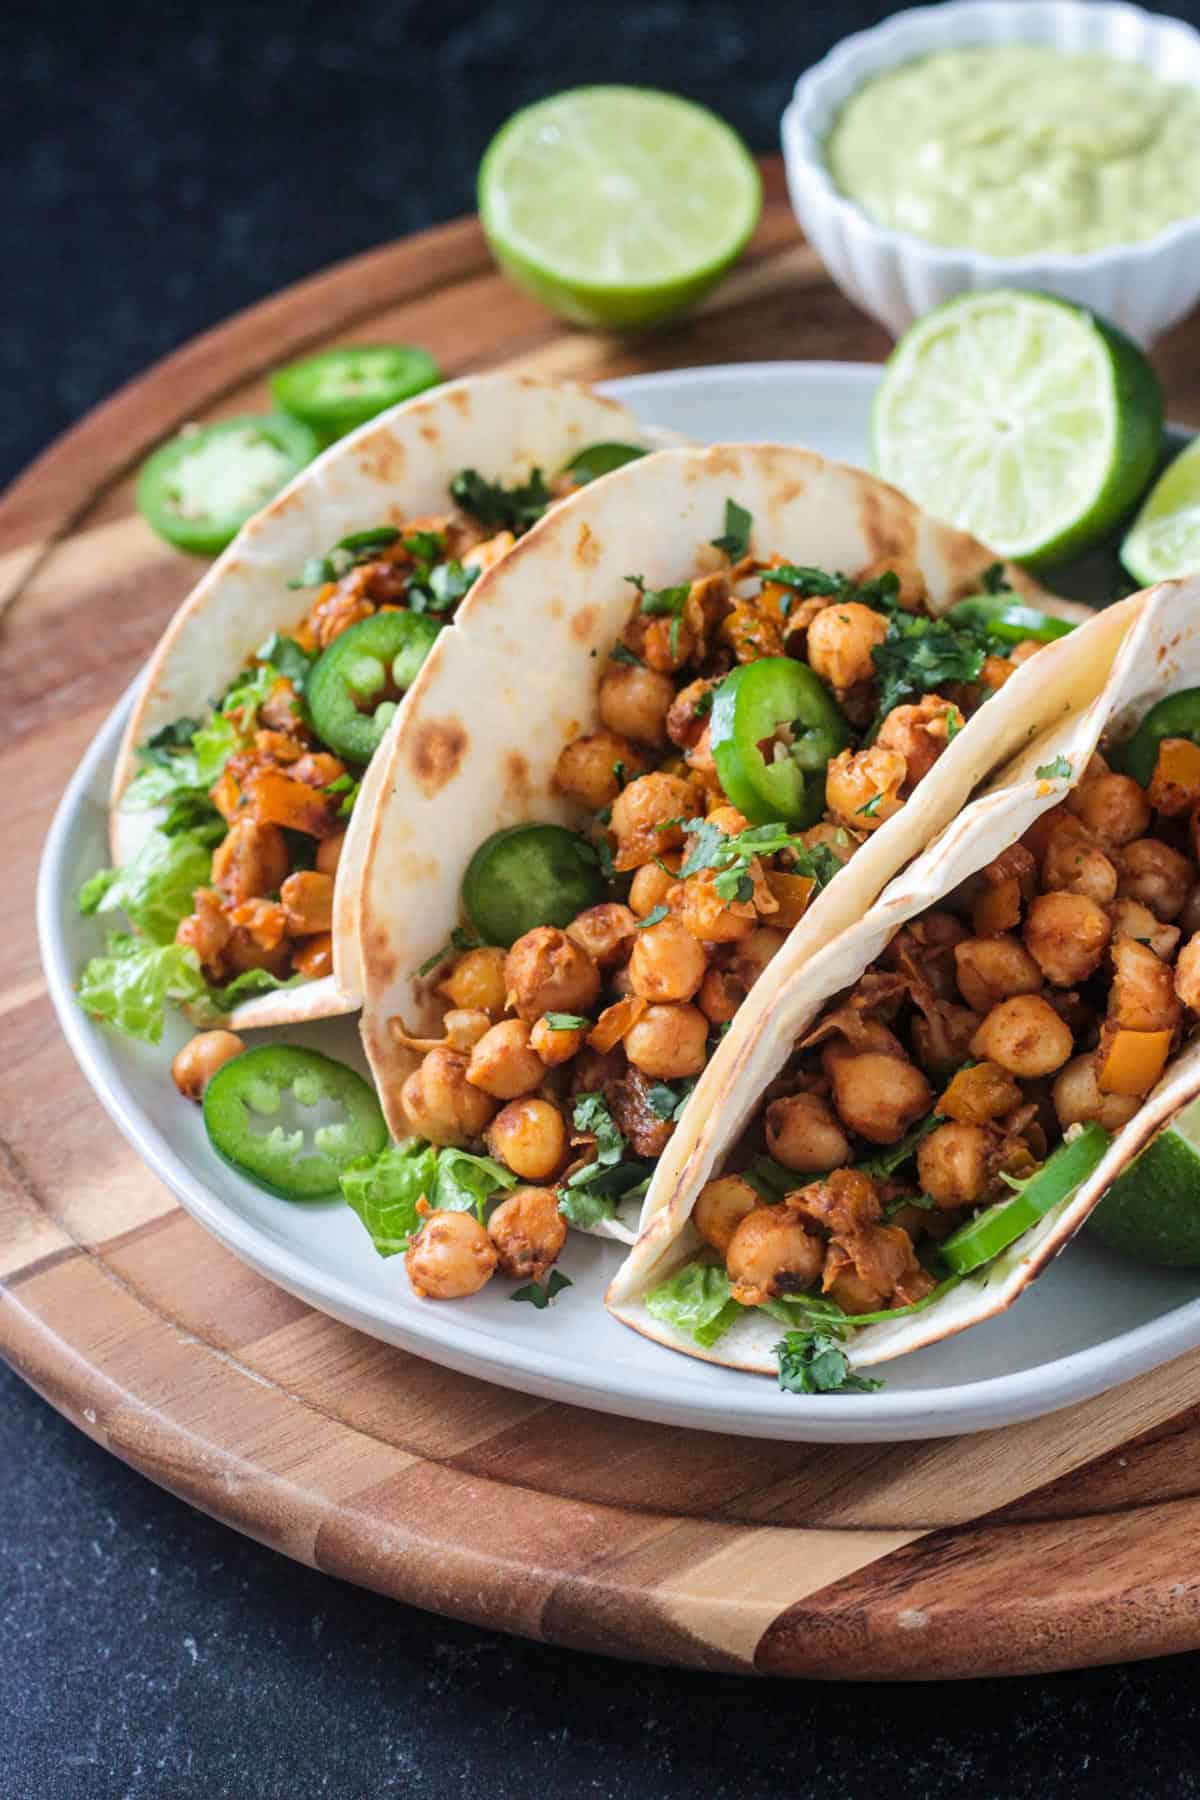 Chickpeas spilling out of a tortilla.